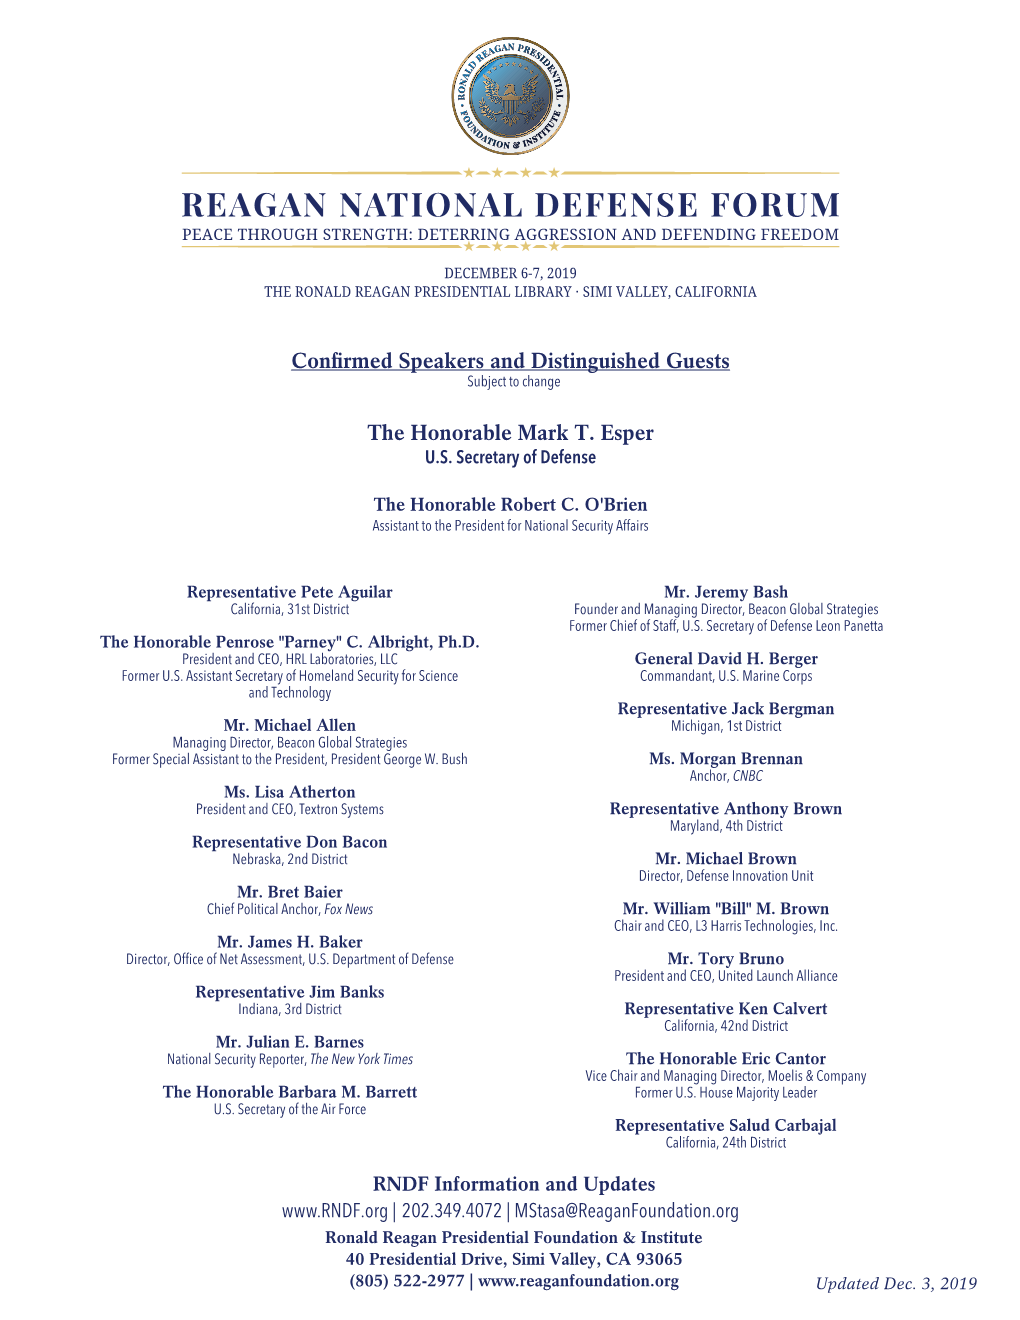 Reagan National Defense Forum Peace Through Strength: Deterring Aggression and Defending Freedom